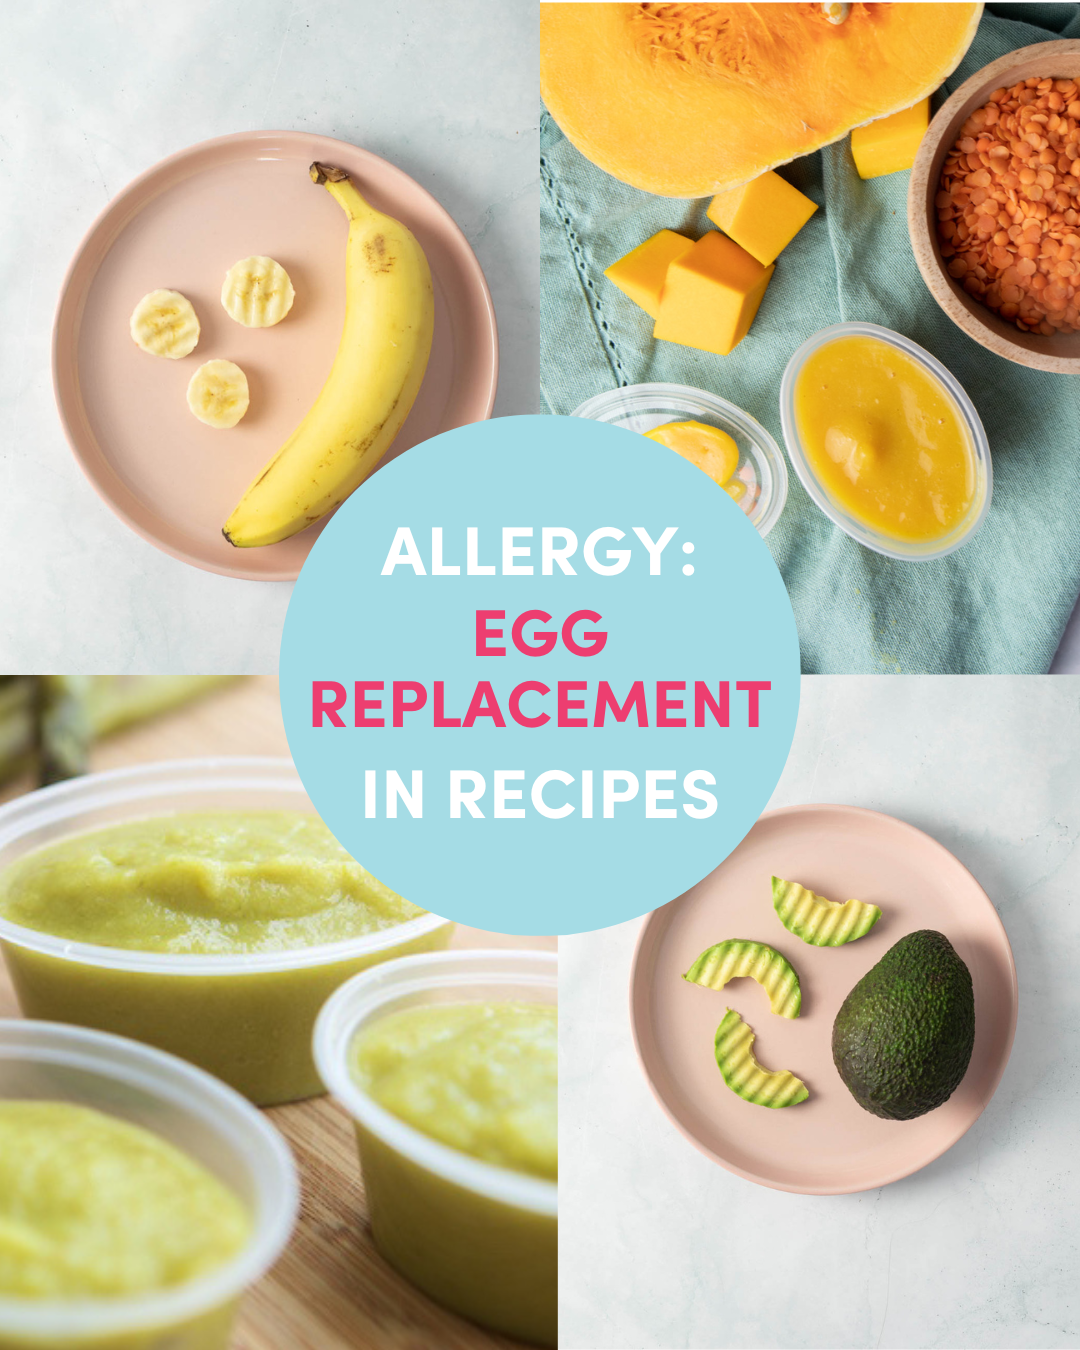 Allergy: Egg replacement in recipes